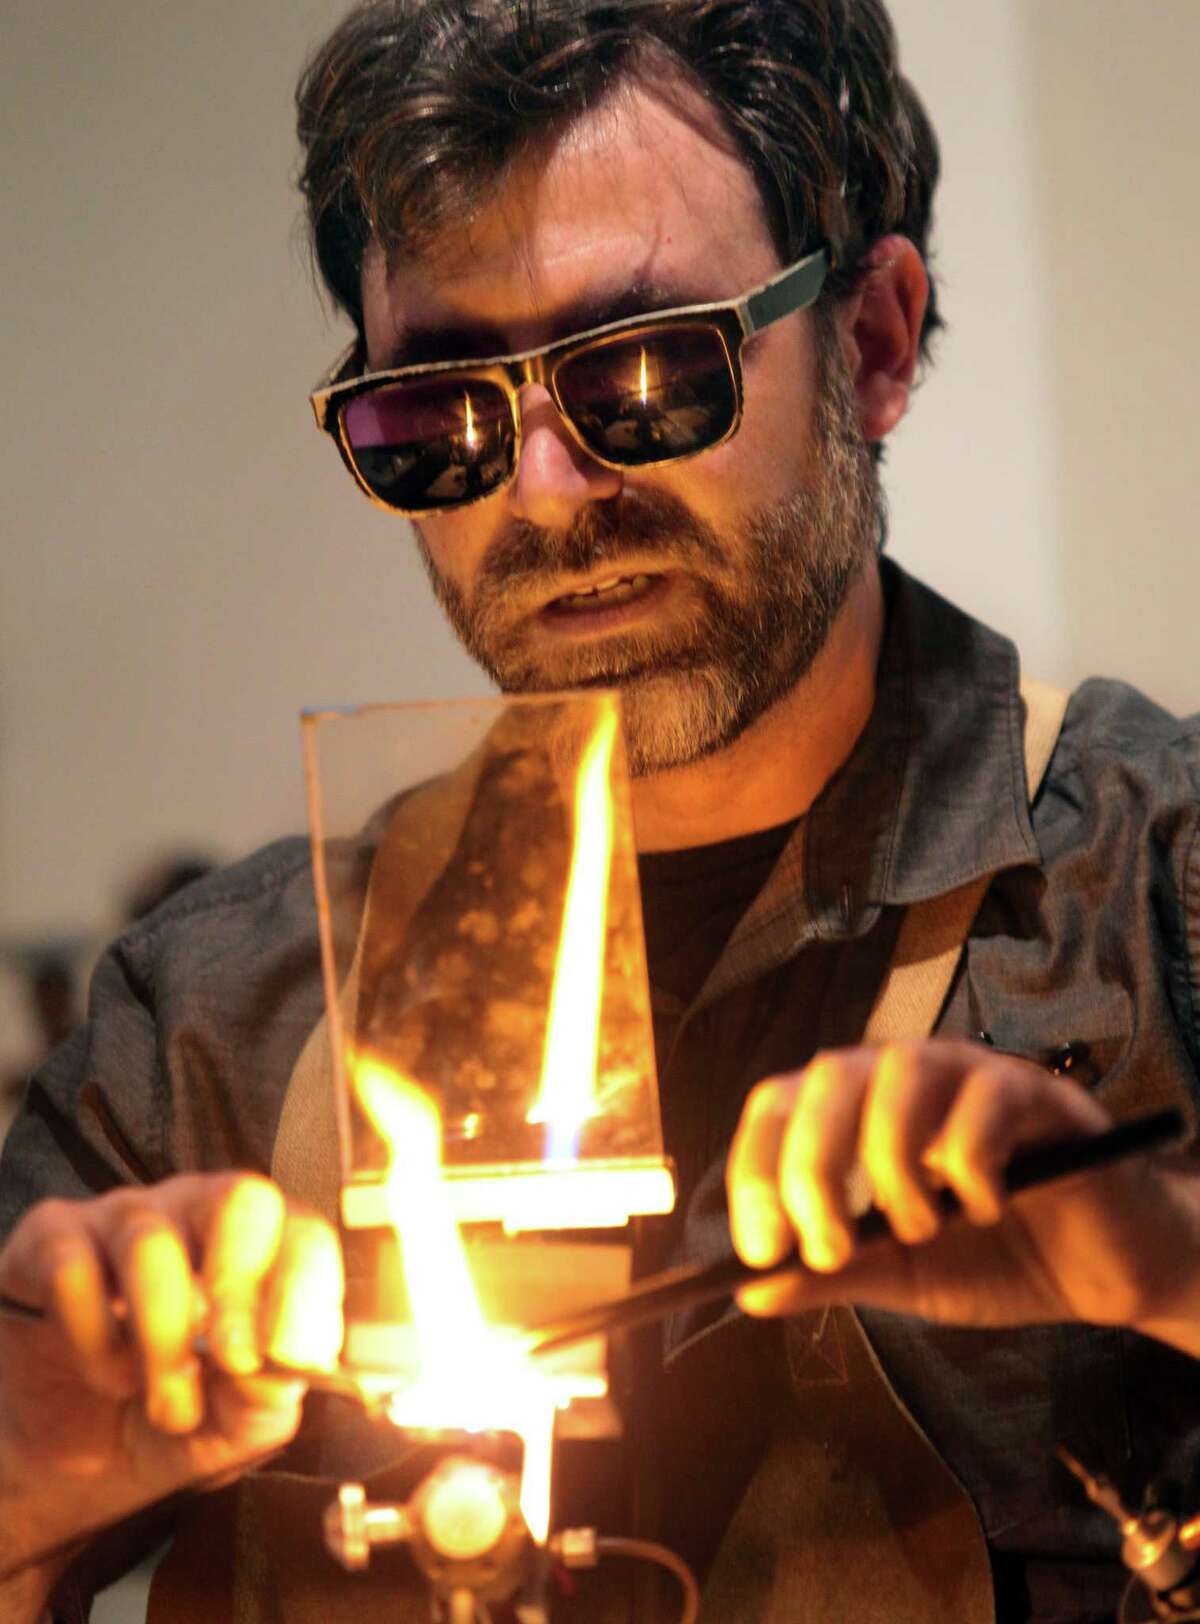 Greenwich glass artist David Licata gives a demonstration of his art at Greenwich Arts Council's Bendheim Gallery in Greenwich, Conn., on Thursday March 9, 2023.